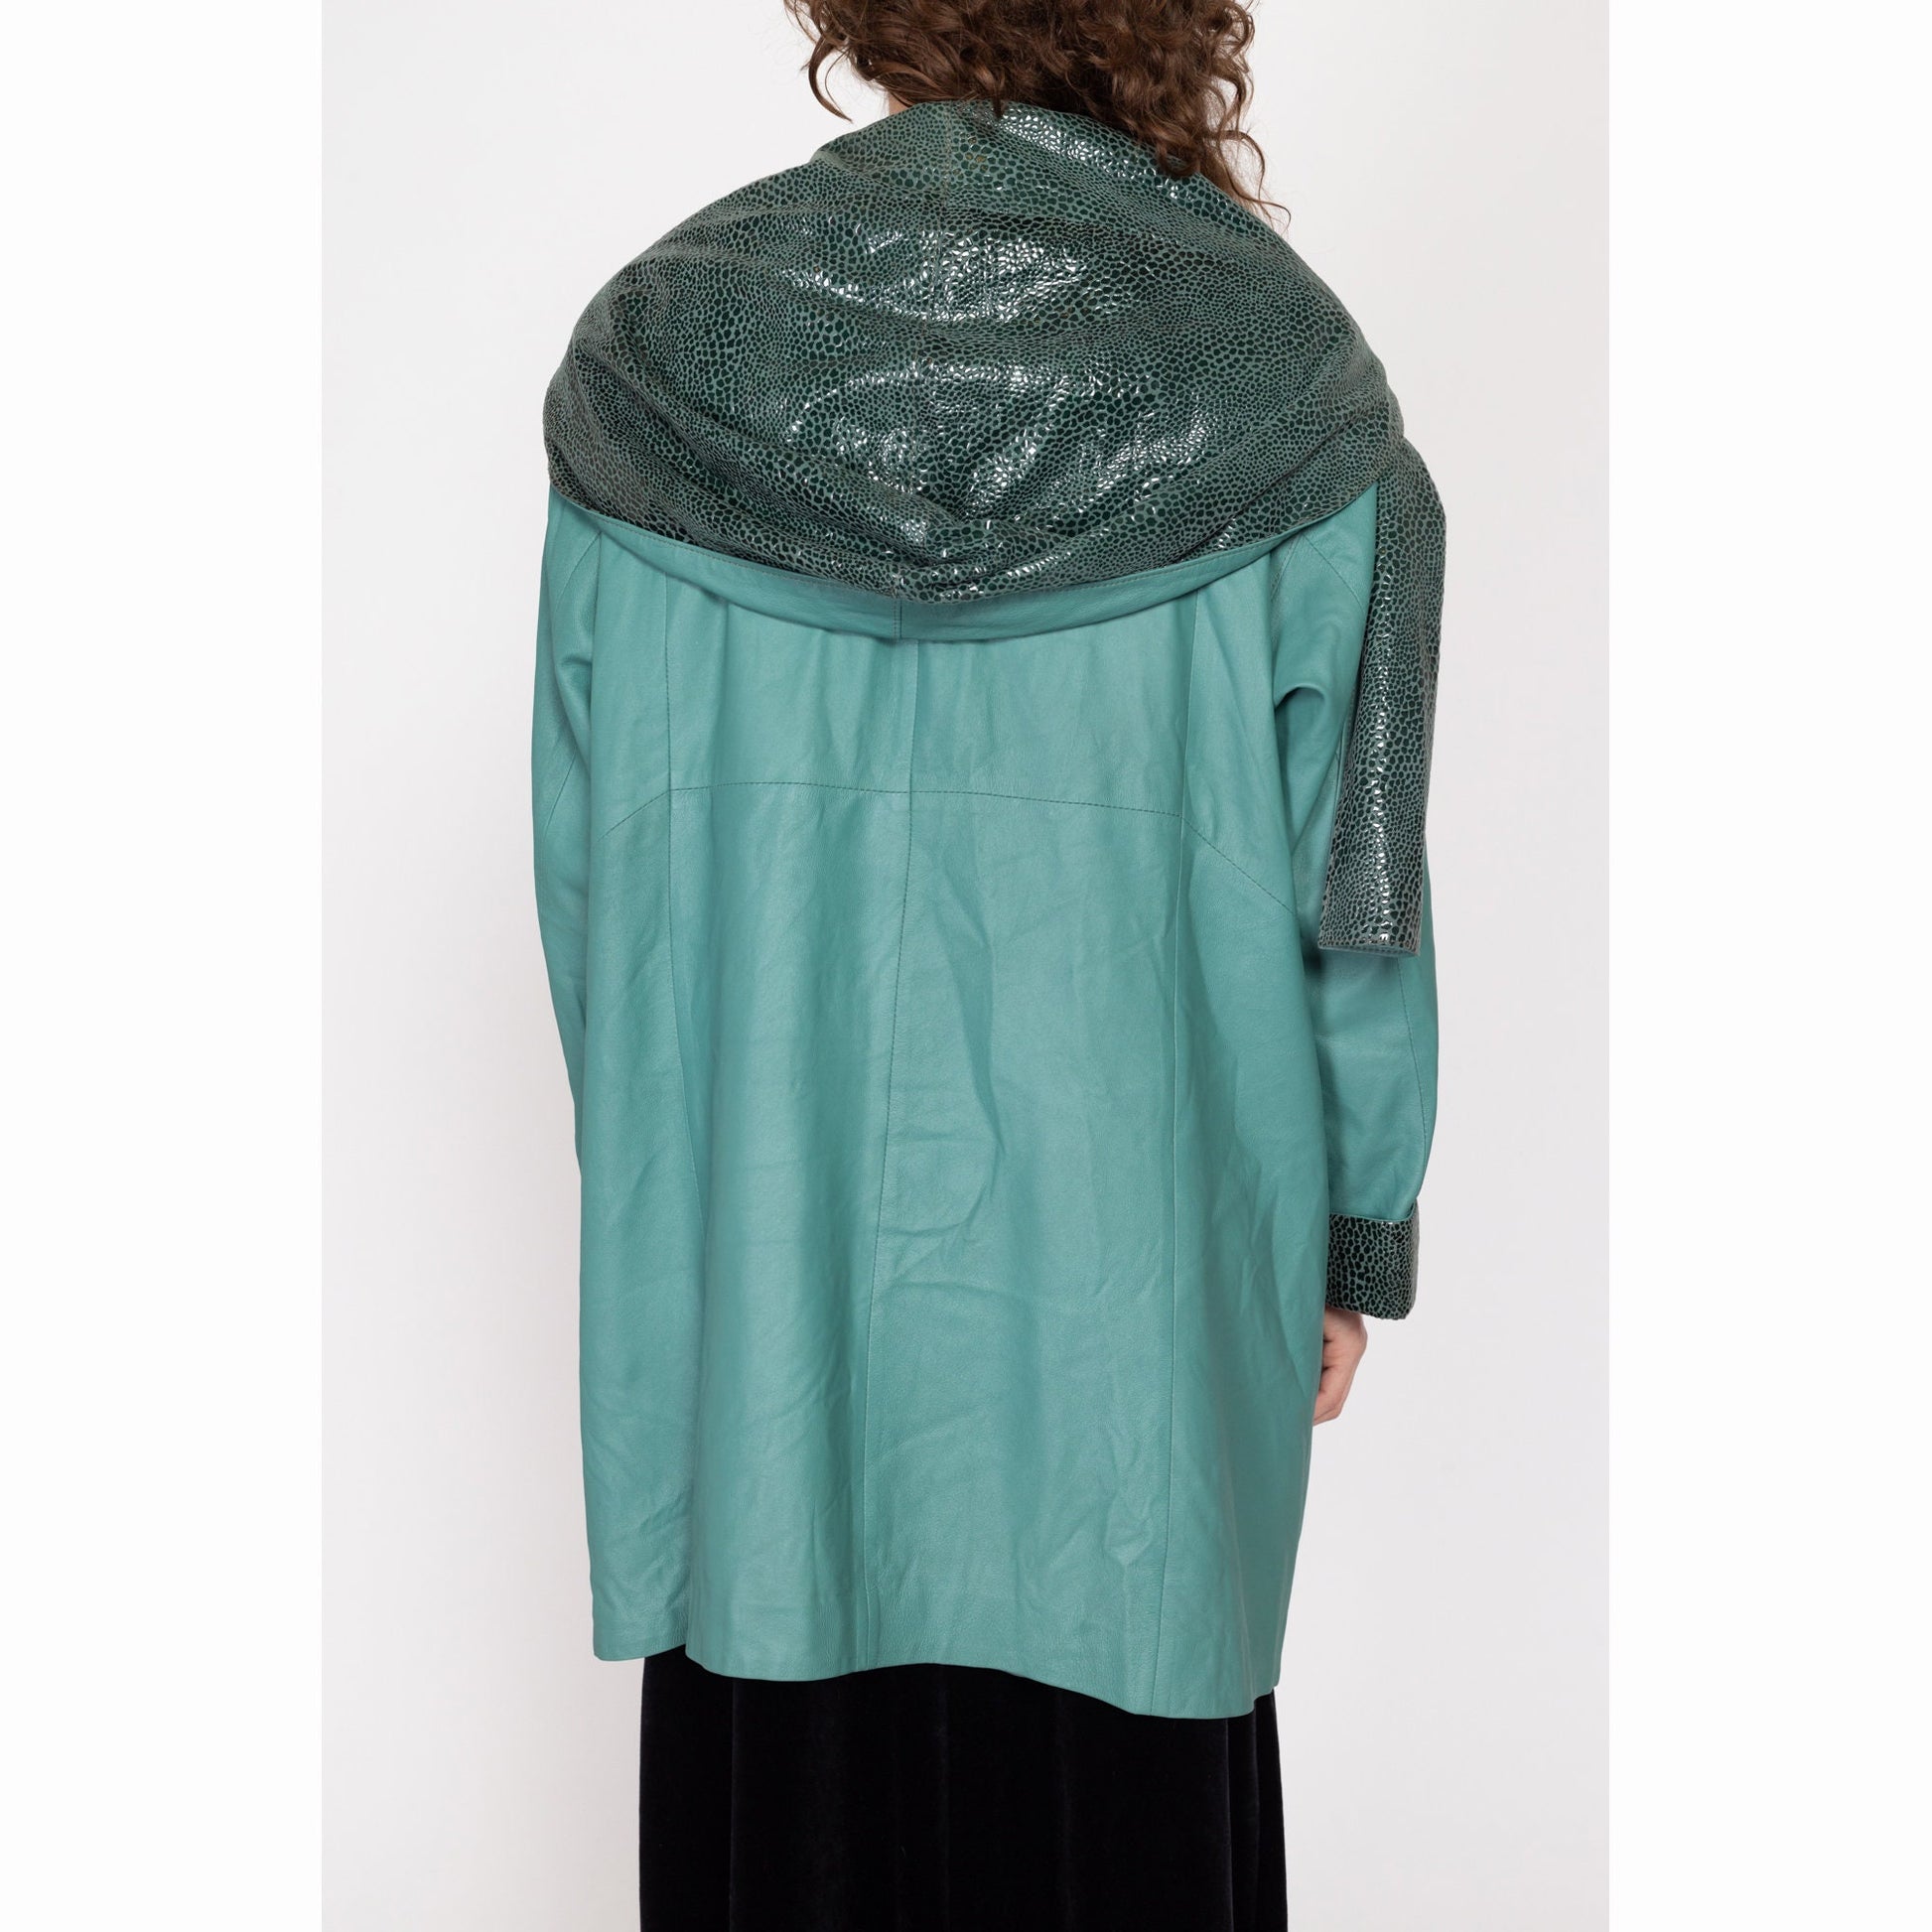 XL 80s Sage Green Snakeskin Leather Hooded Jacket | Vintage Button Up Mid Length Shawl Hood Coat